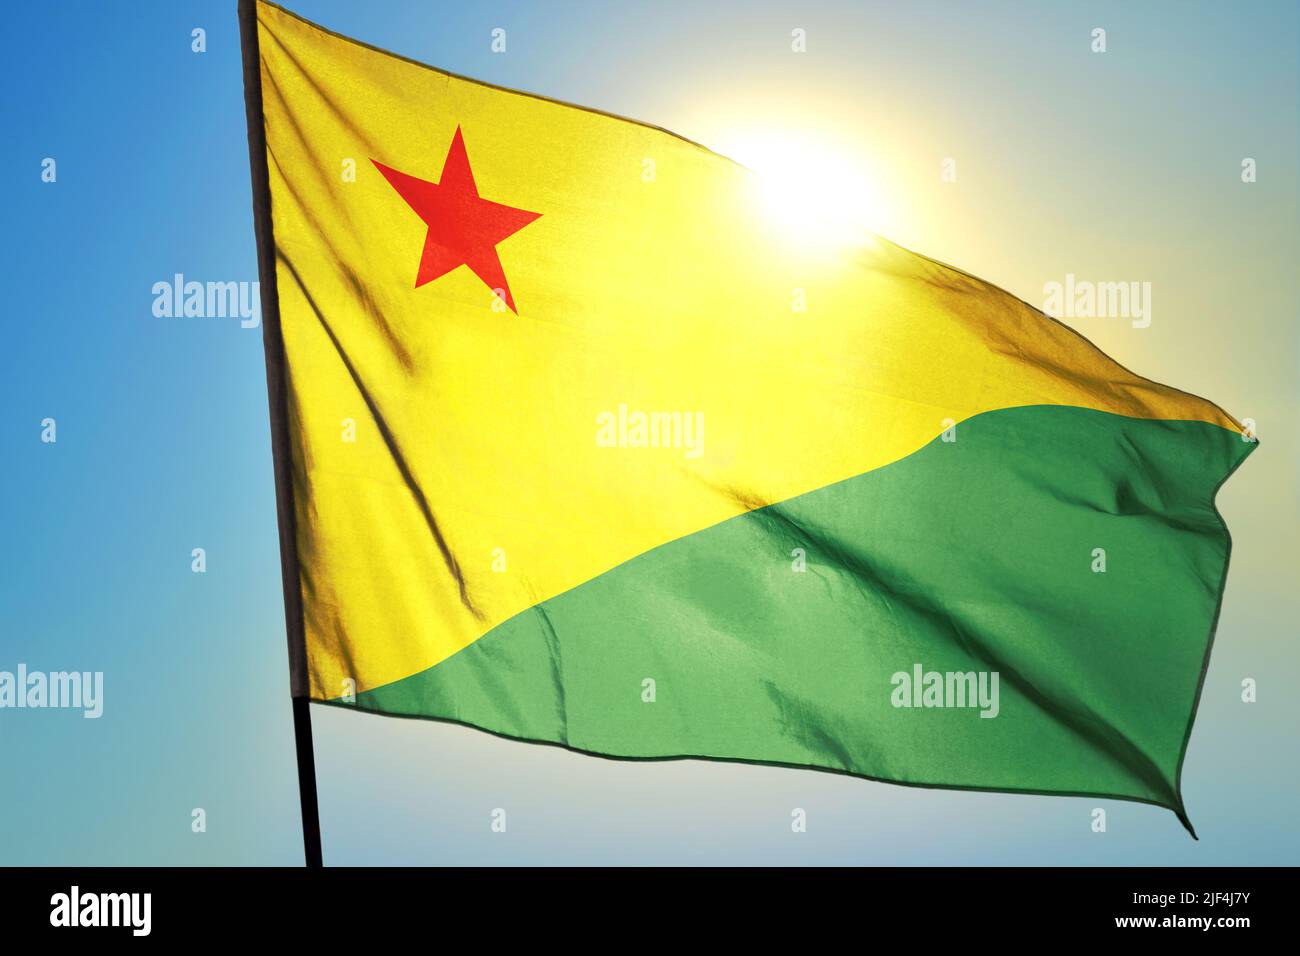 Acre state of Brazil flag waving on the wind Stock Photo